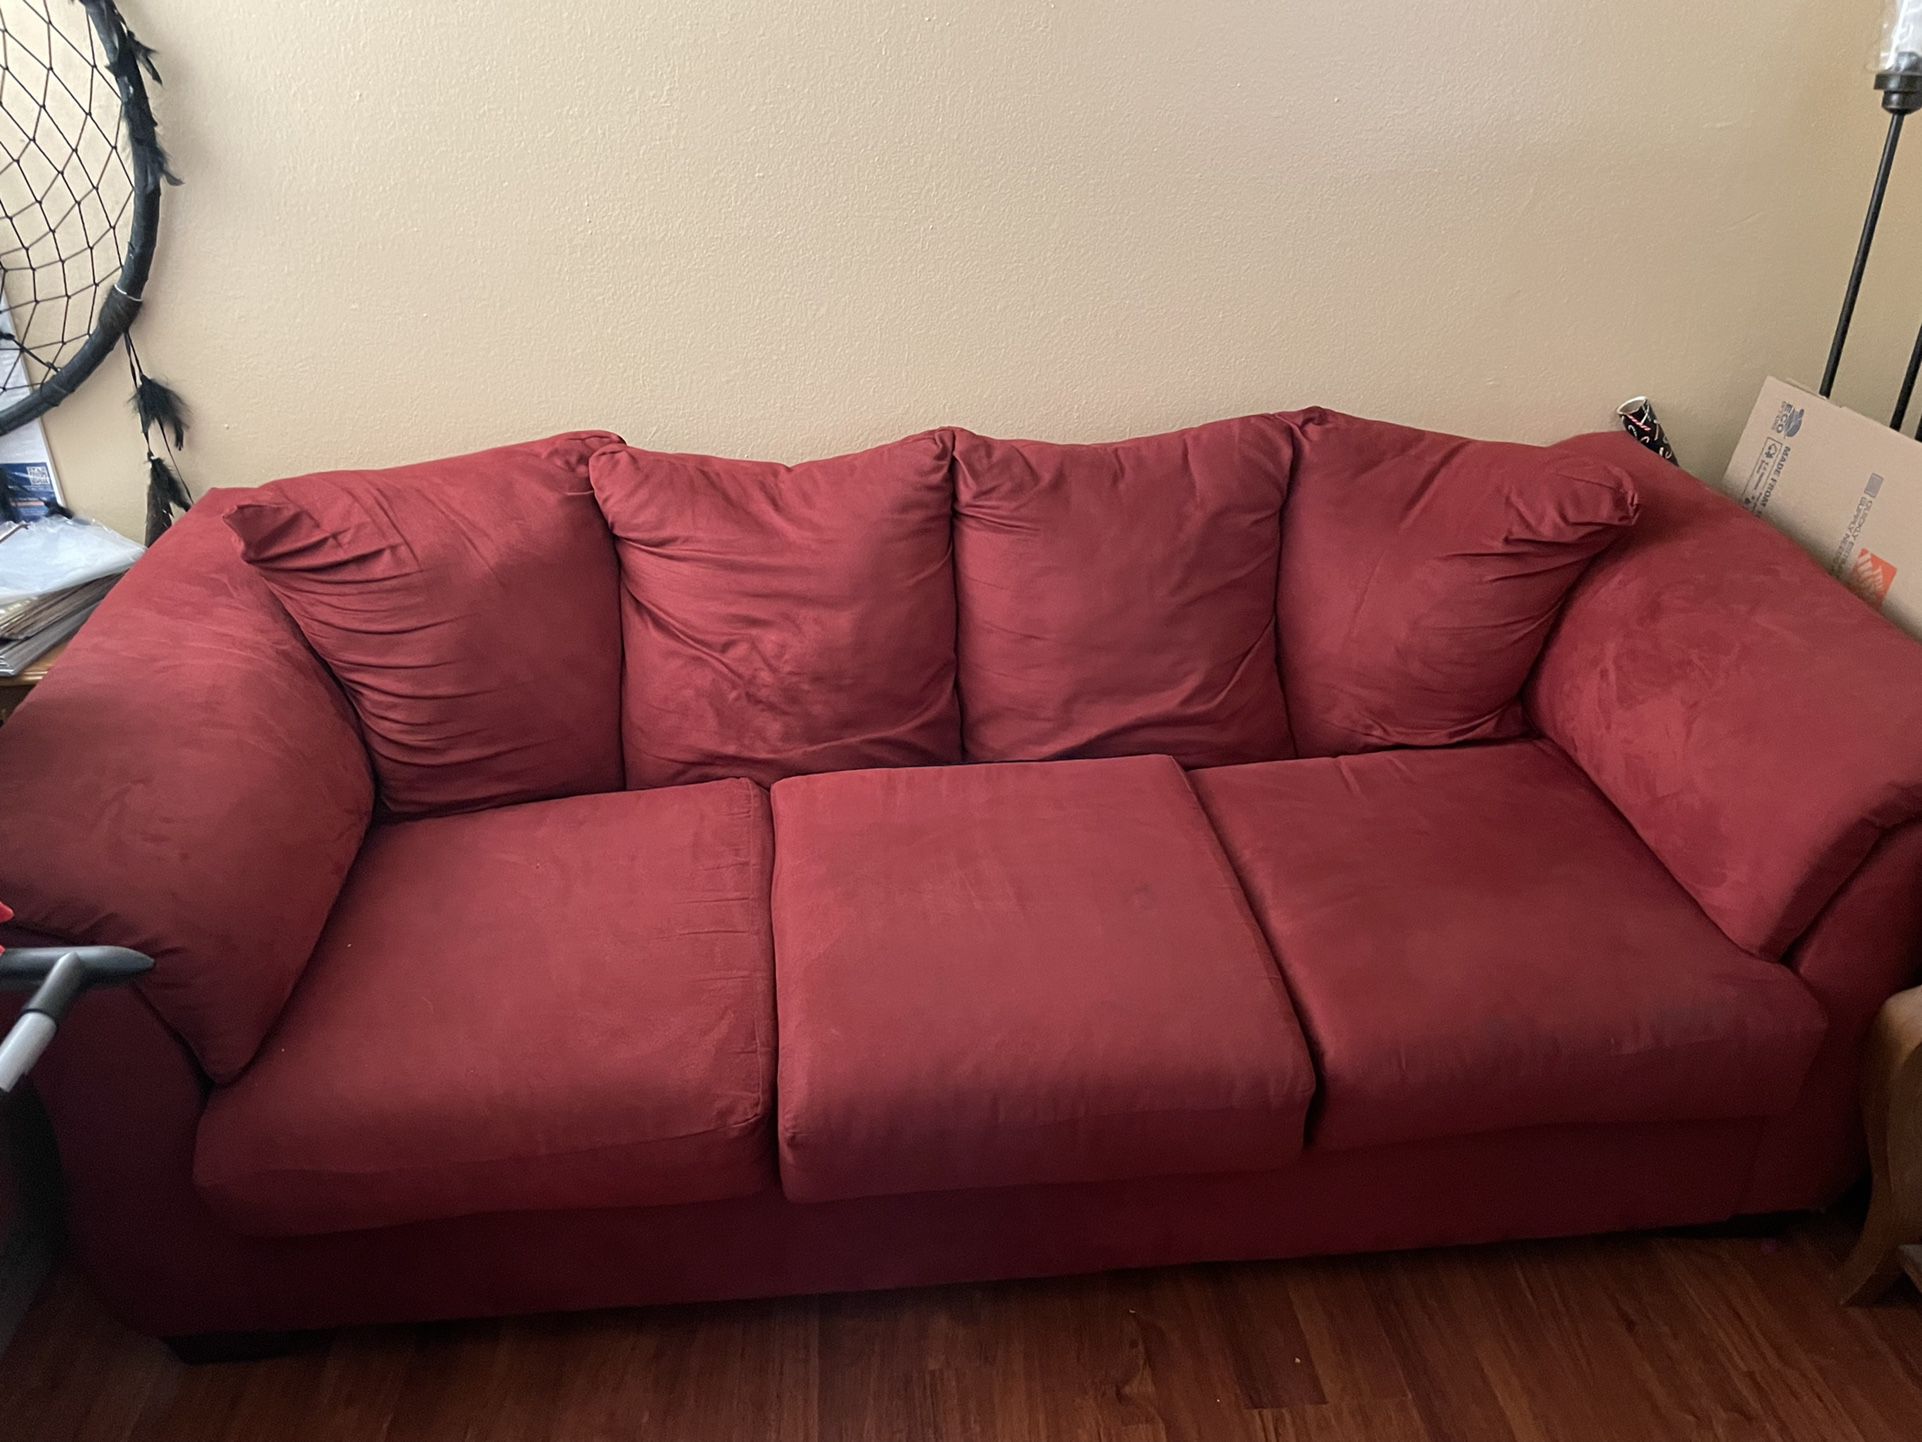 FREE - Red Couch - Approx 7.5ft - FREE